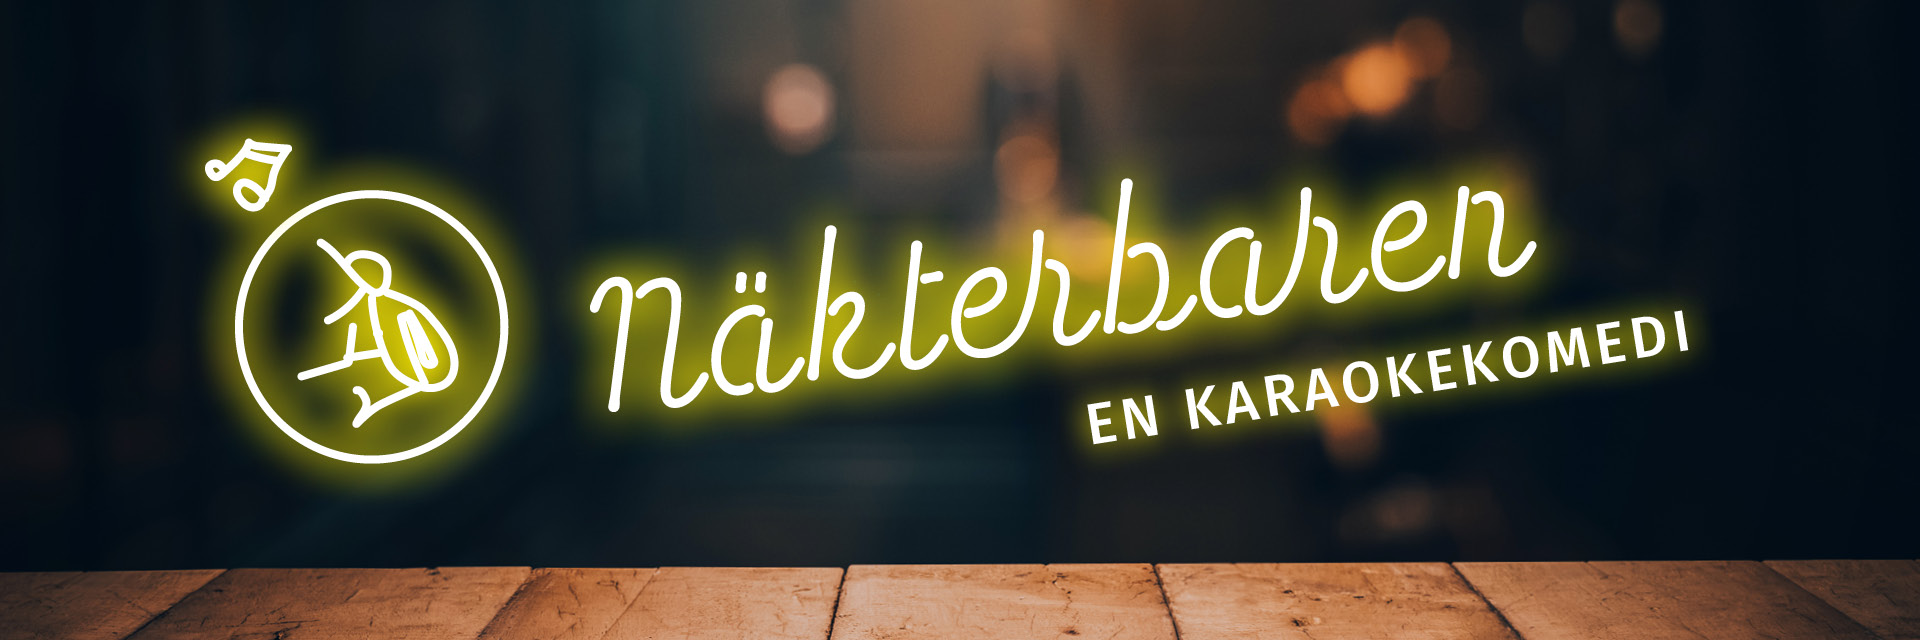 Advertisement image for the "Näkterbaren" performance. Written in text resembling neon tubes "Näkterbaren" and underneath in large neon letters "A karaoke comedy." On the left side, within a neon circle, there is an outline of a bird. Outside the circle is a neon-colored musical note, appearing to emanate as a song from the bird's mouth.